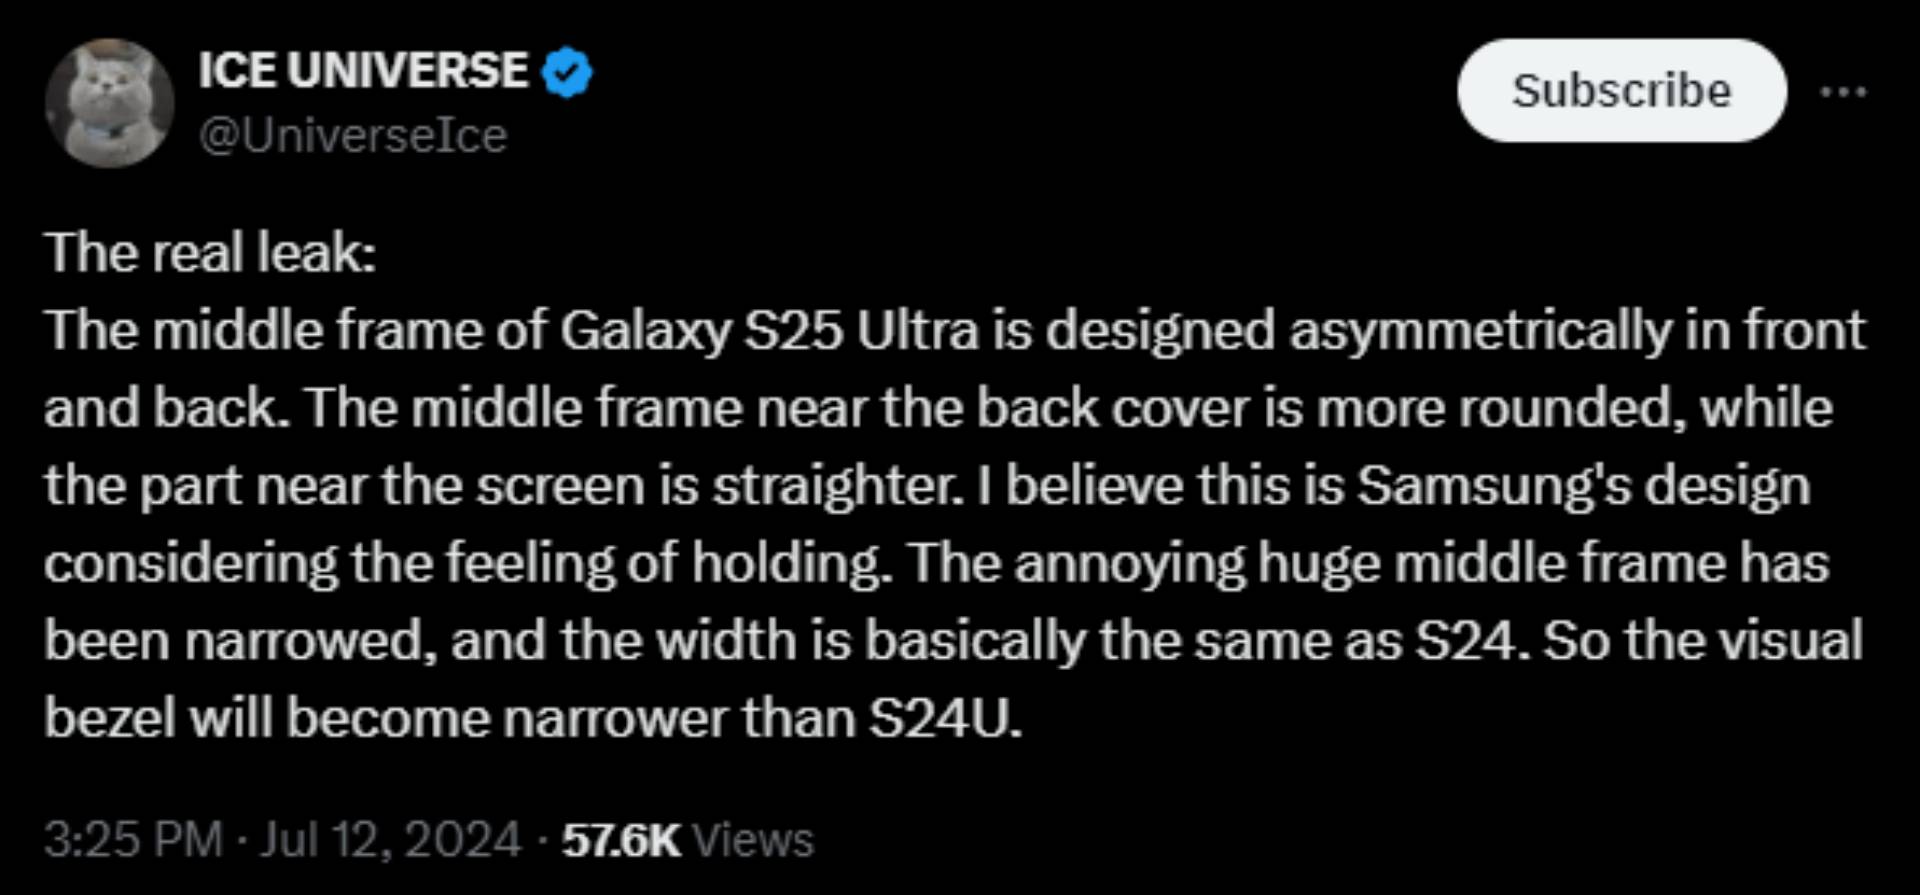 Screenshot of Ice Universe's X post about Galaxy S25 Ultra's frame design.